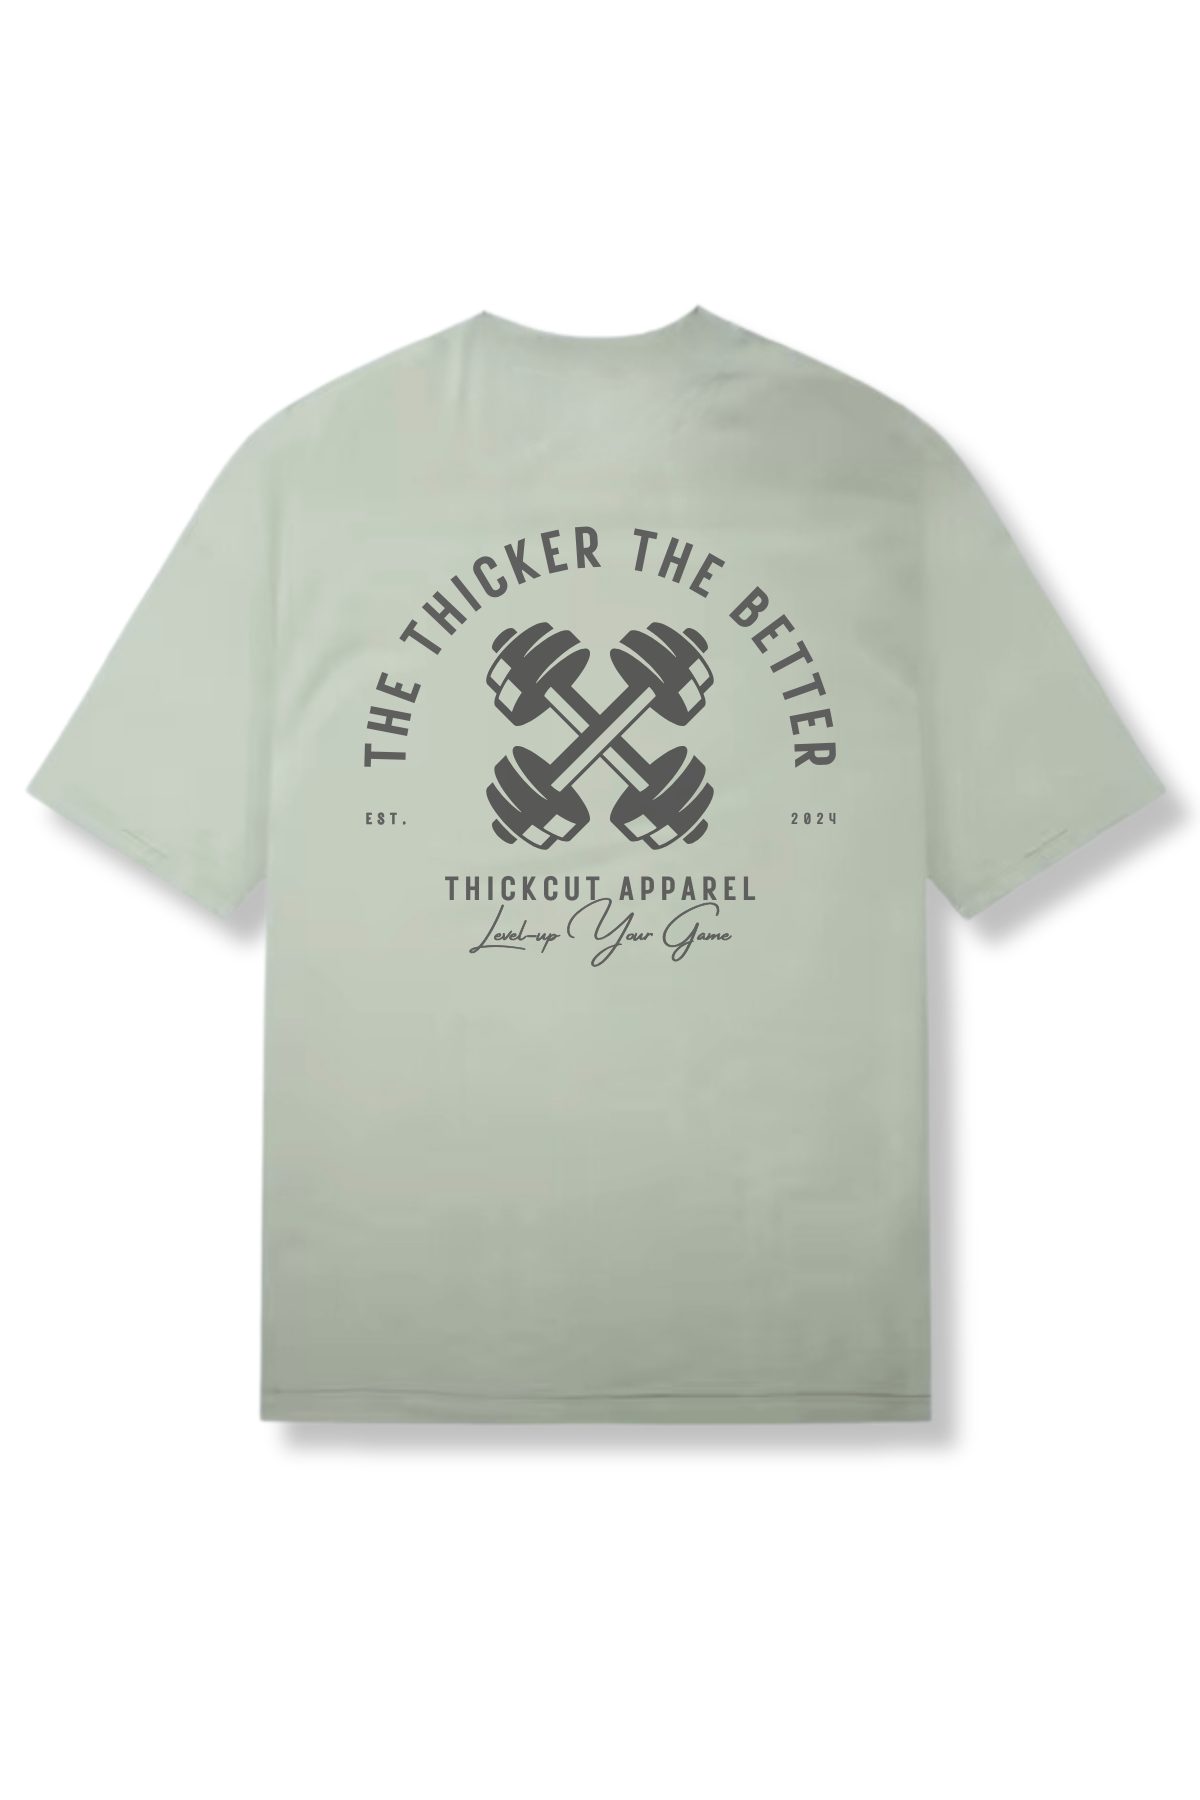 THE THICKER THE BETTER  Performance Shirt (Mint)